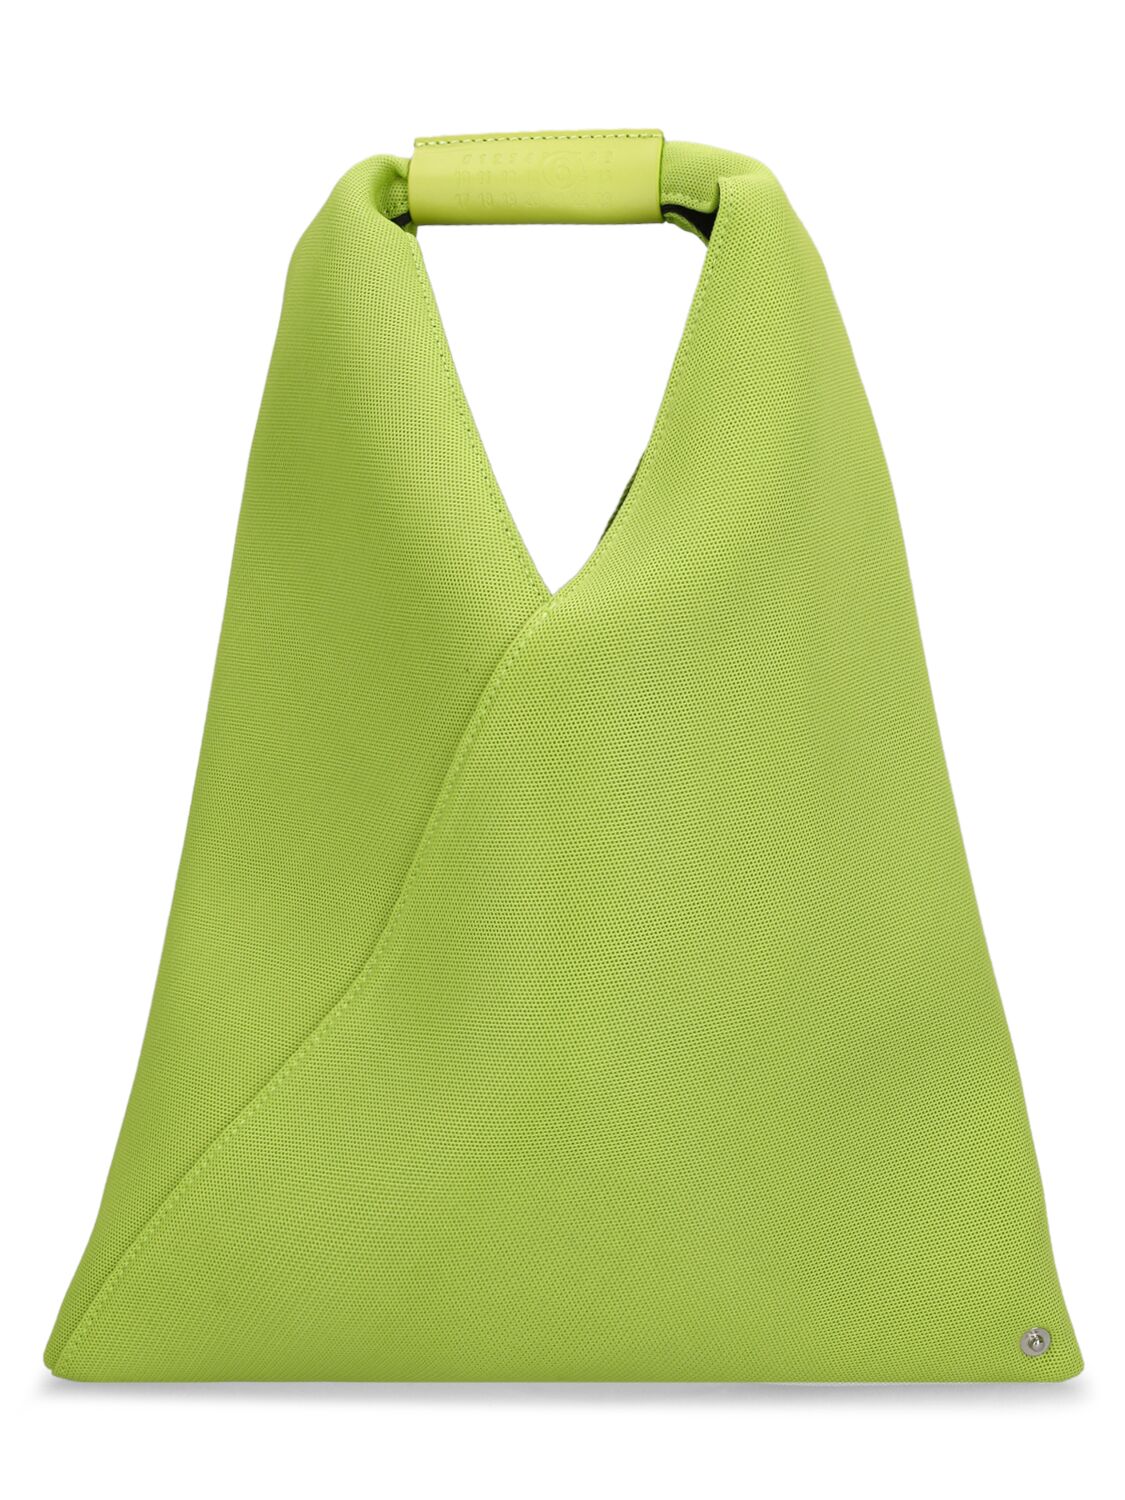 Mm6 Maison Margiela Small Japanese Mesh Top Handle Bag In Lime Green